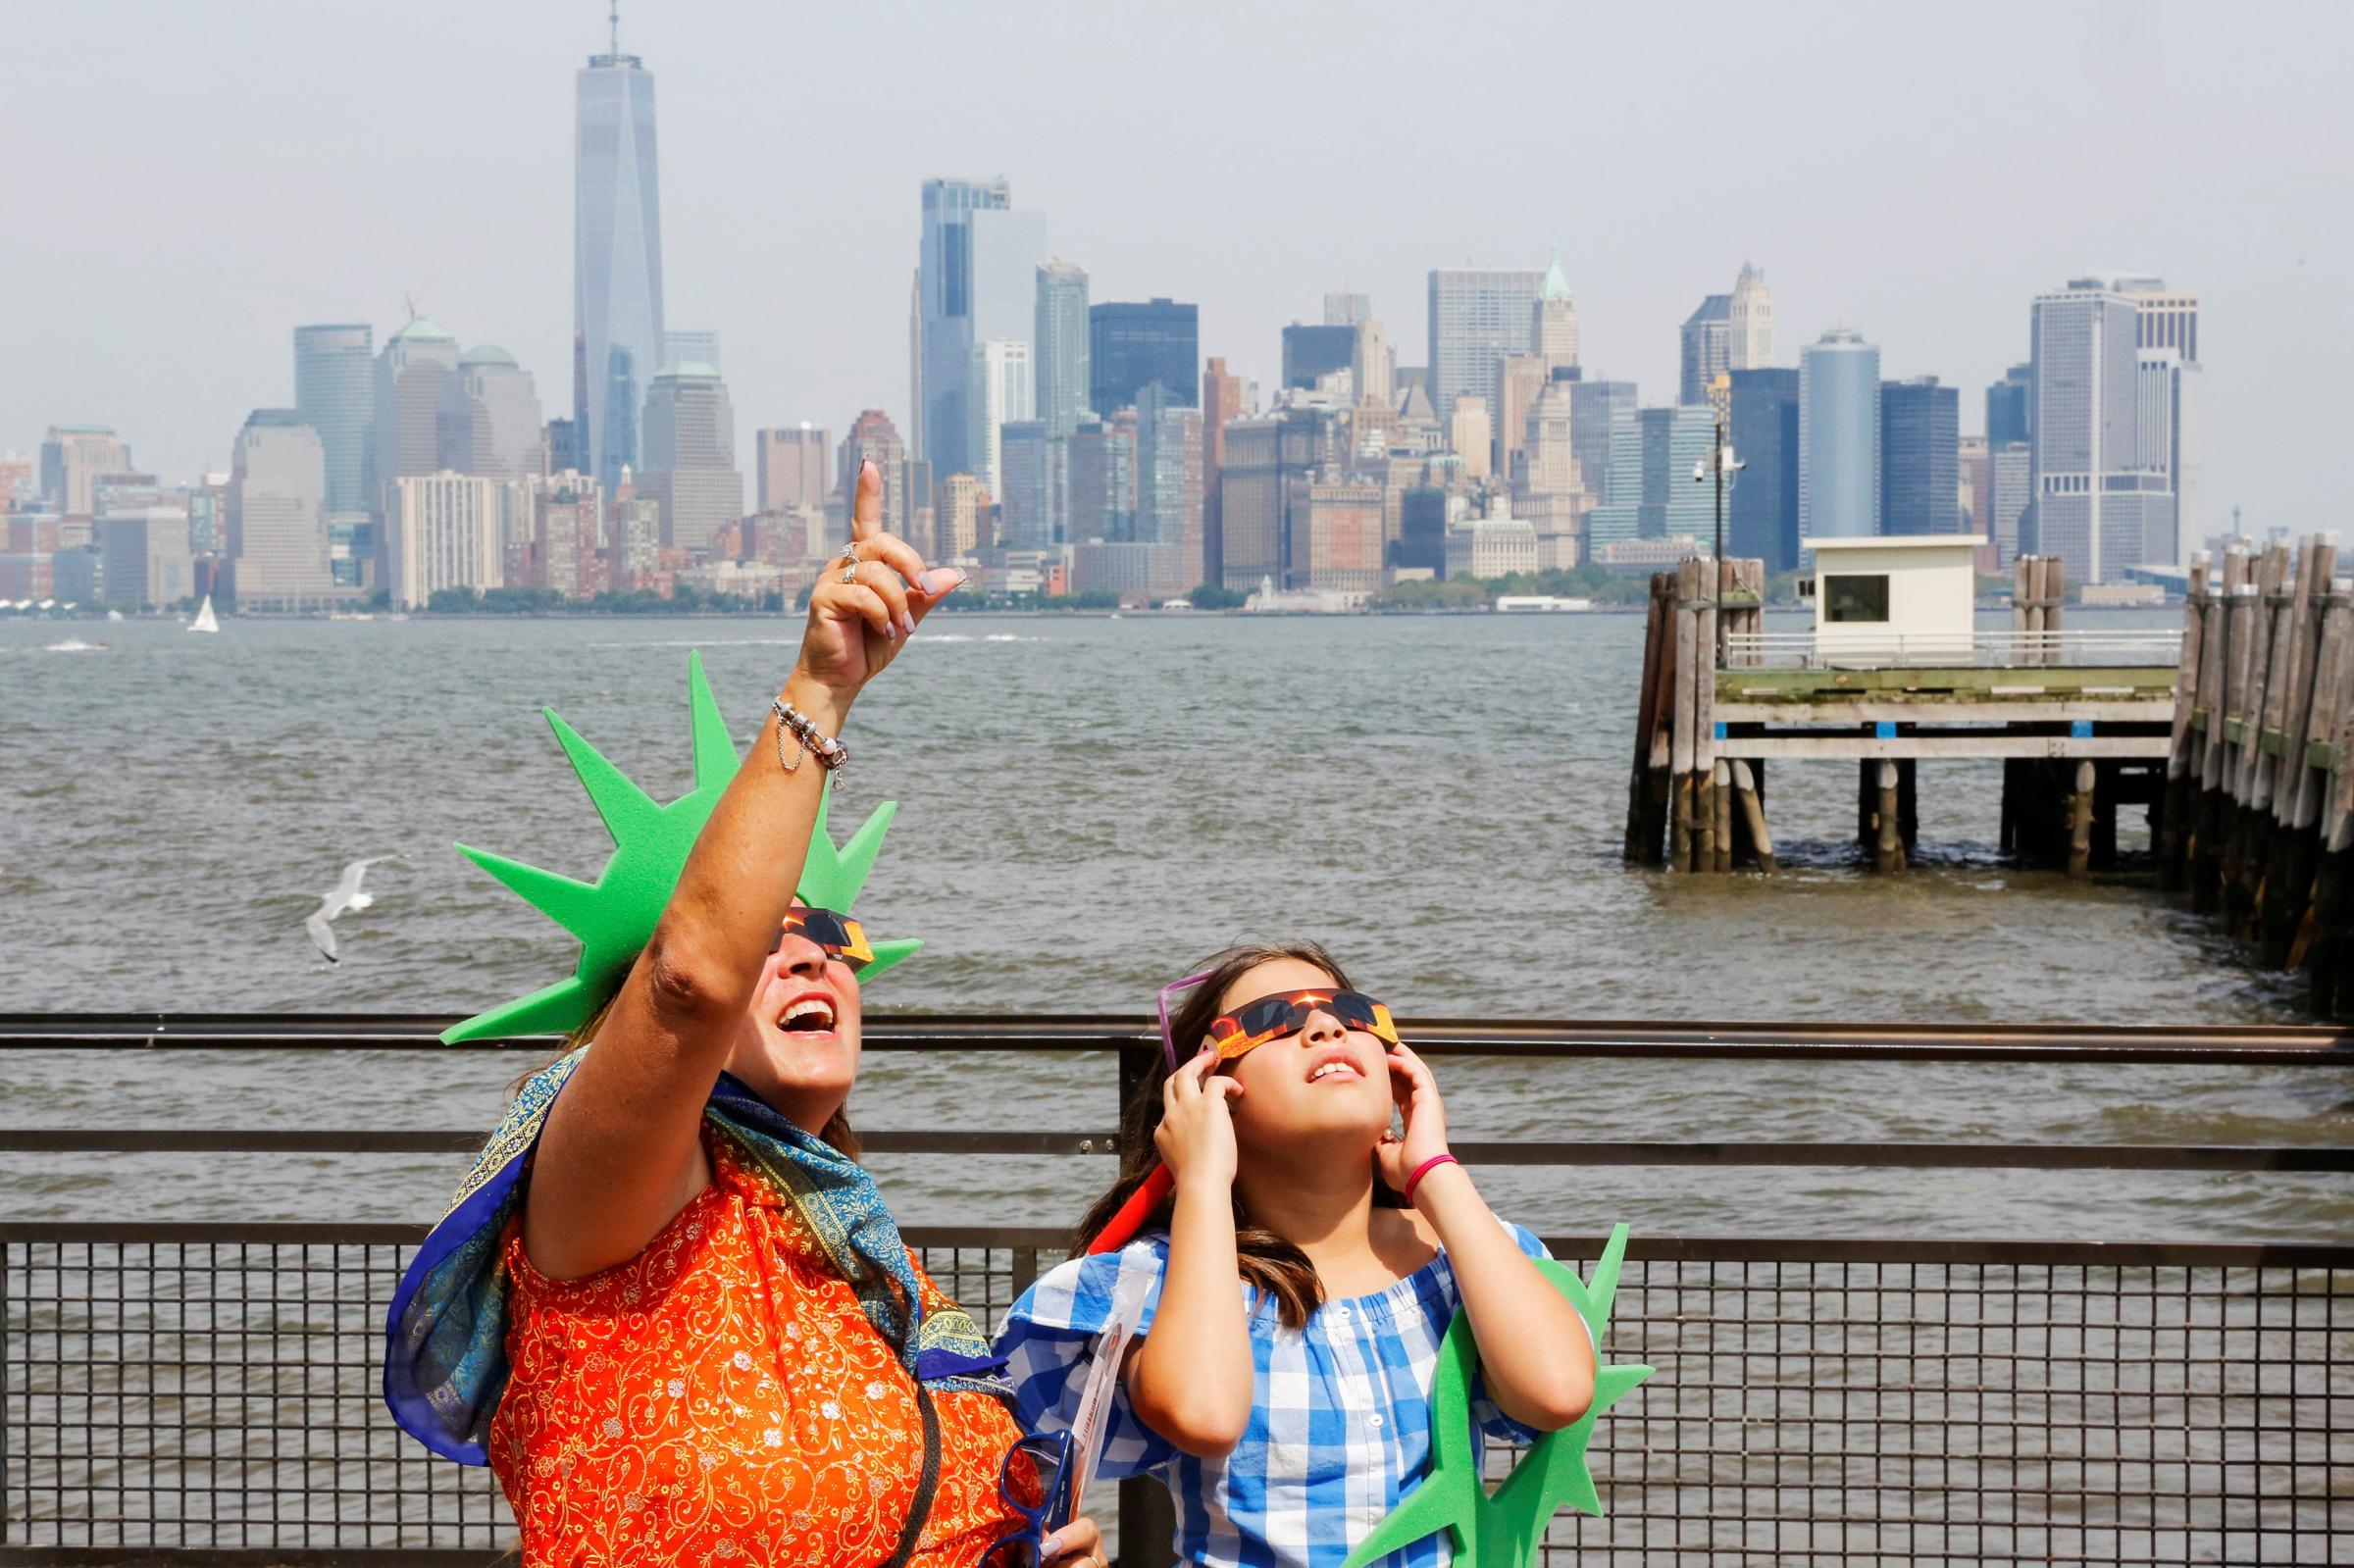 People view the solar eclipse at Liberty State Island as the Lower Manhattan and One World Trade center are seen in the background in New York